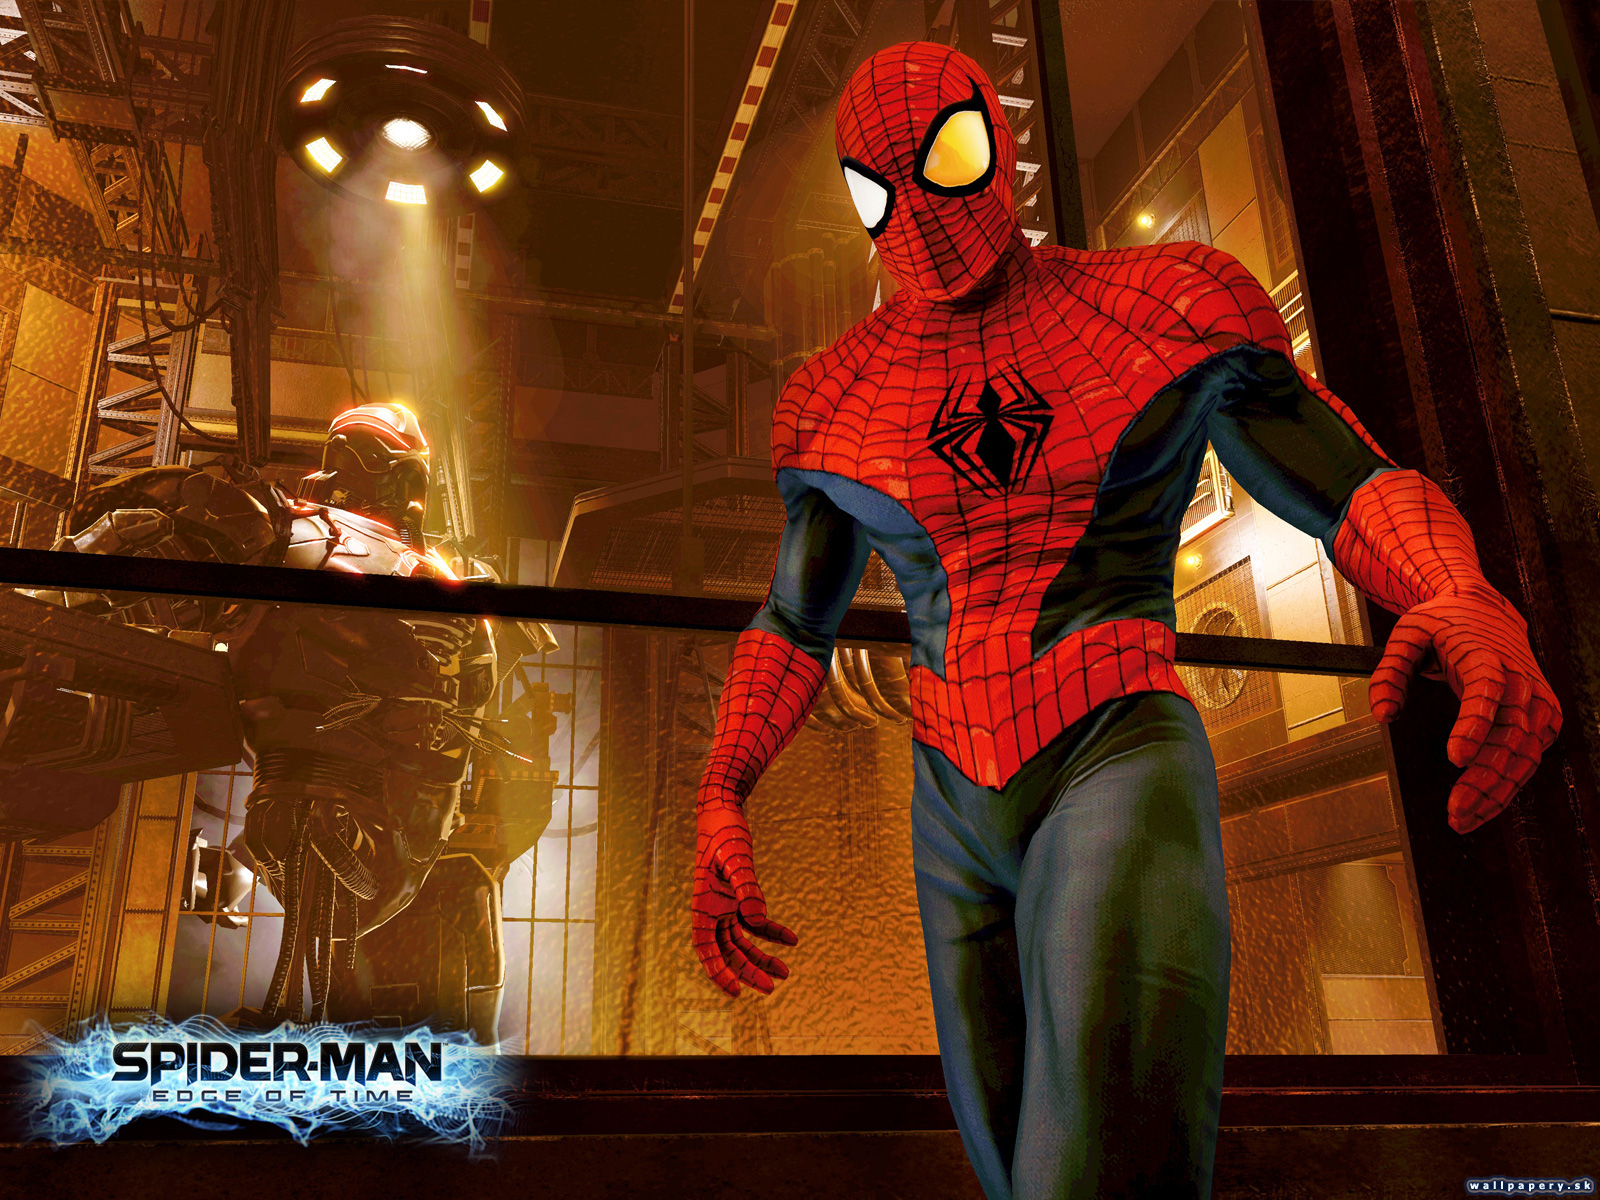 Spider-Man: Edge of Time - wallpaper 2.